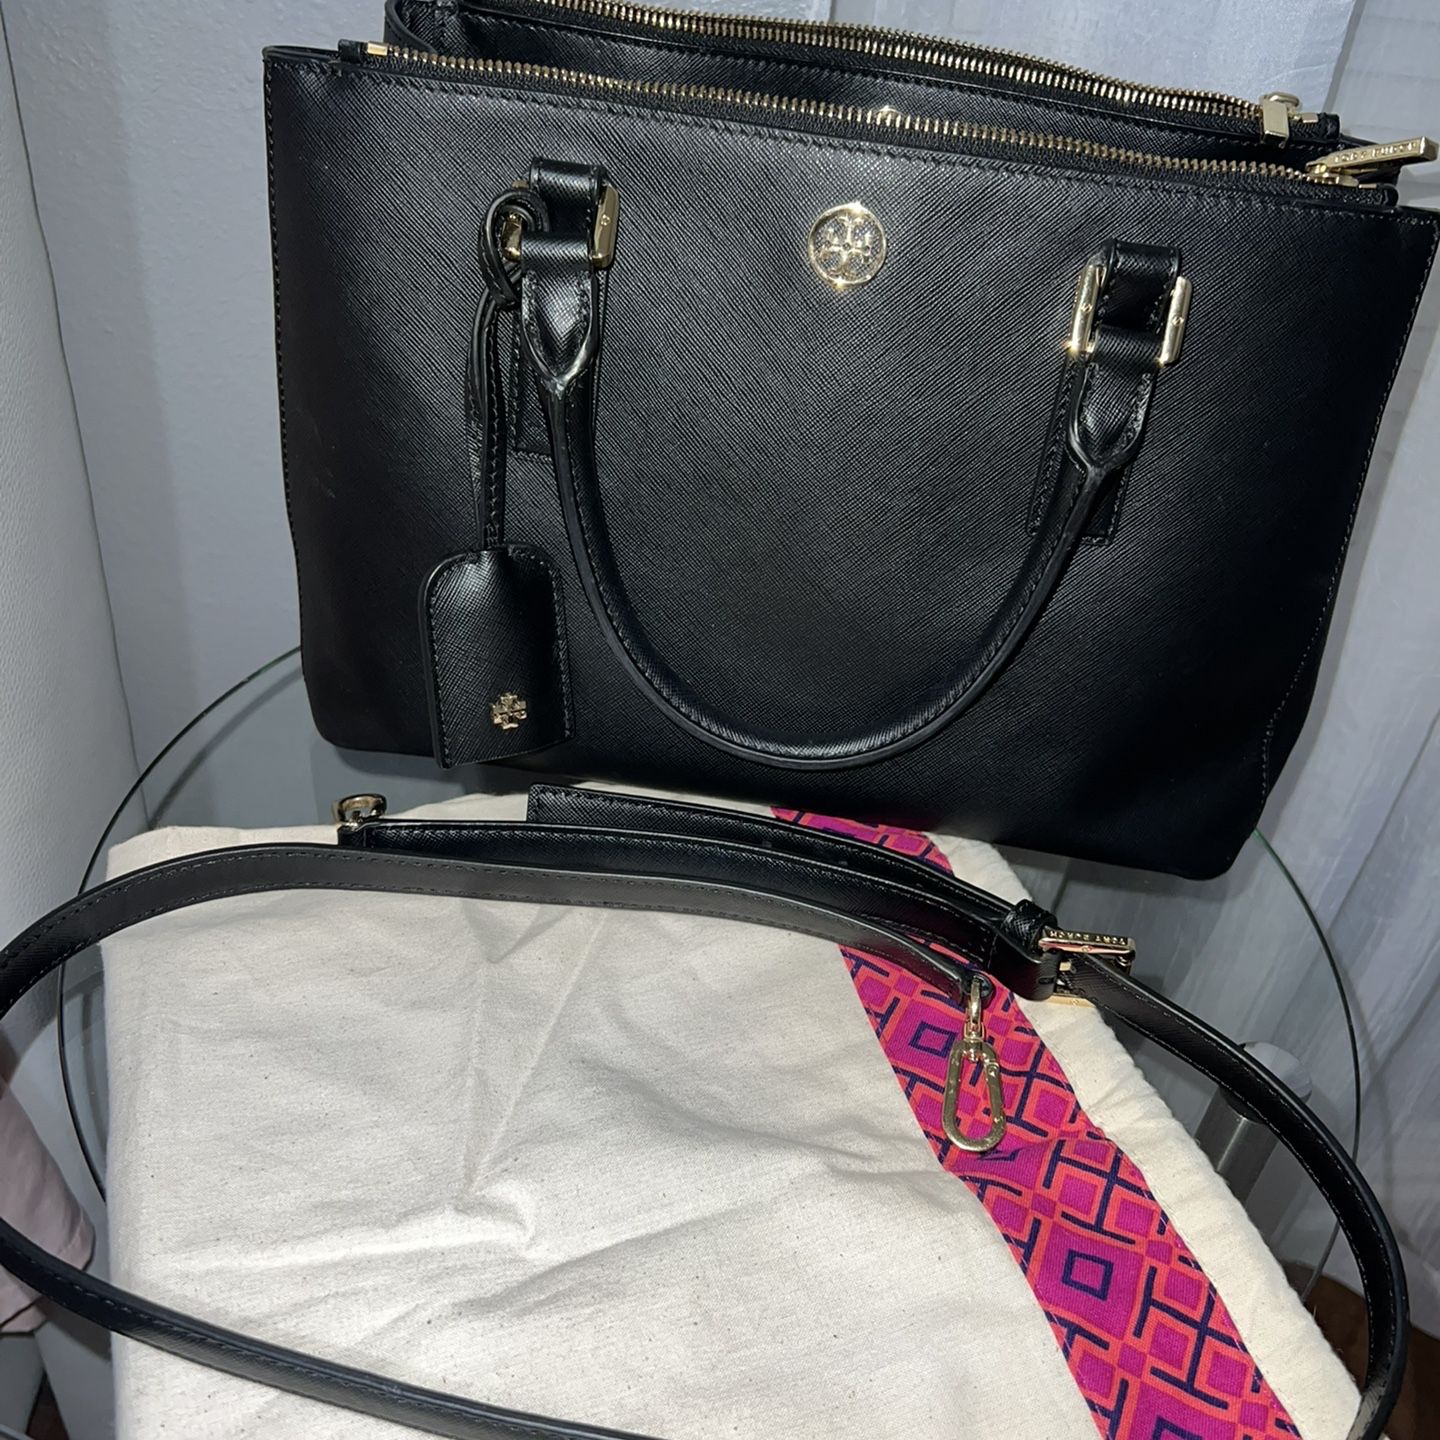 Tory Burch Robinson Small Tote for Sale in San Jose, CA - OfferUp